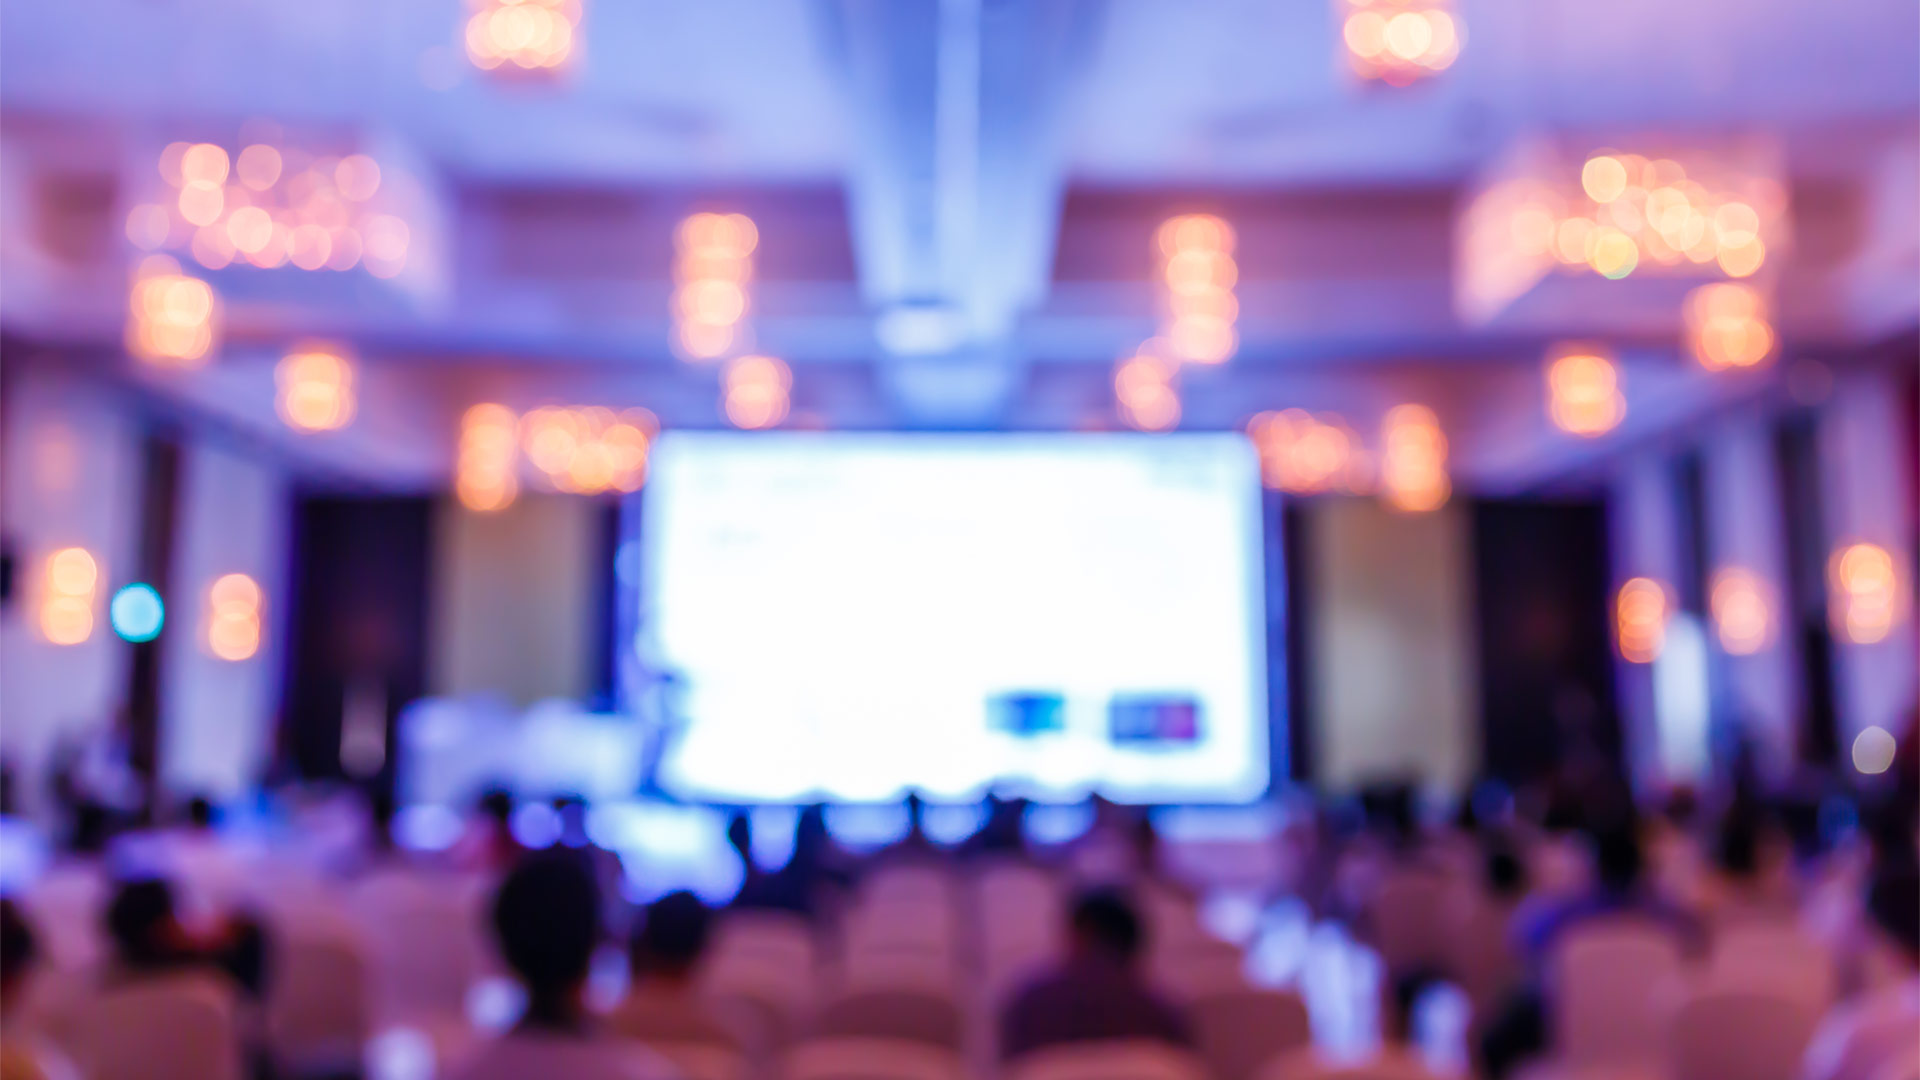 Blurred images of a conference hall